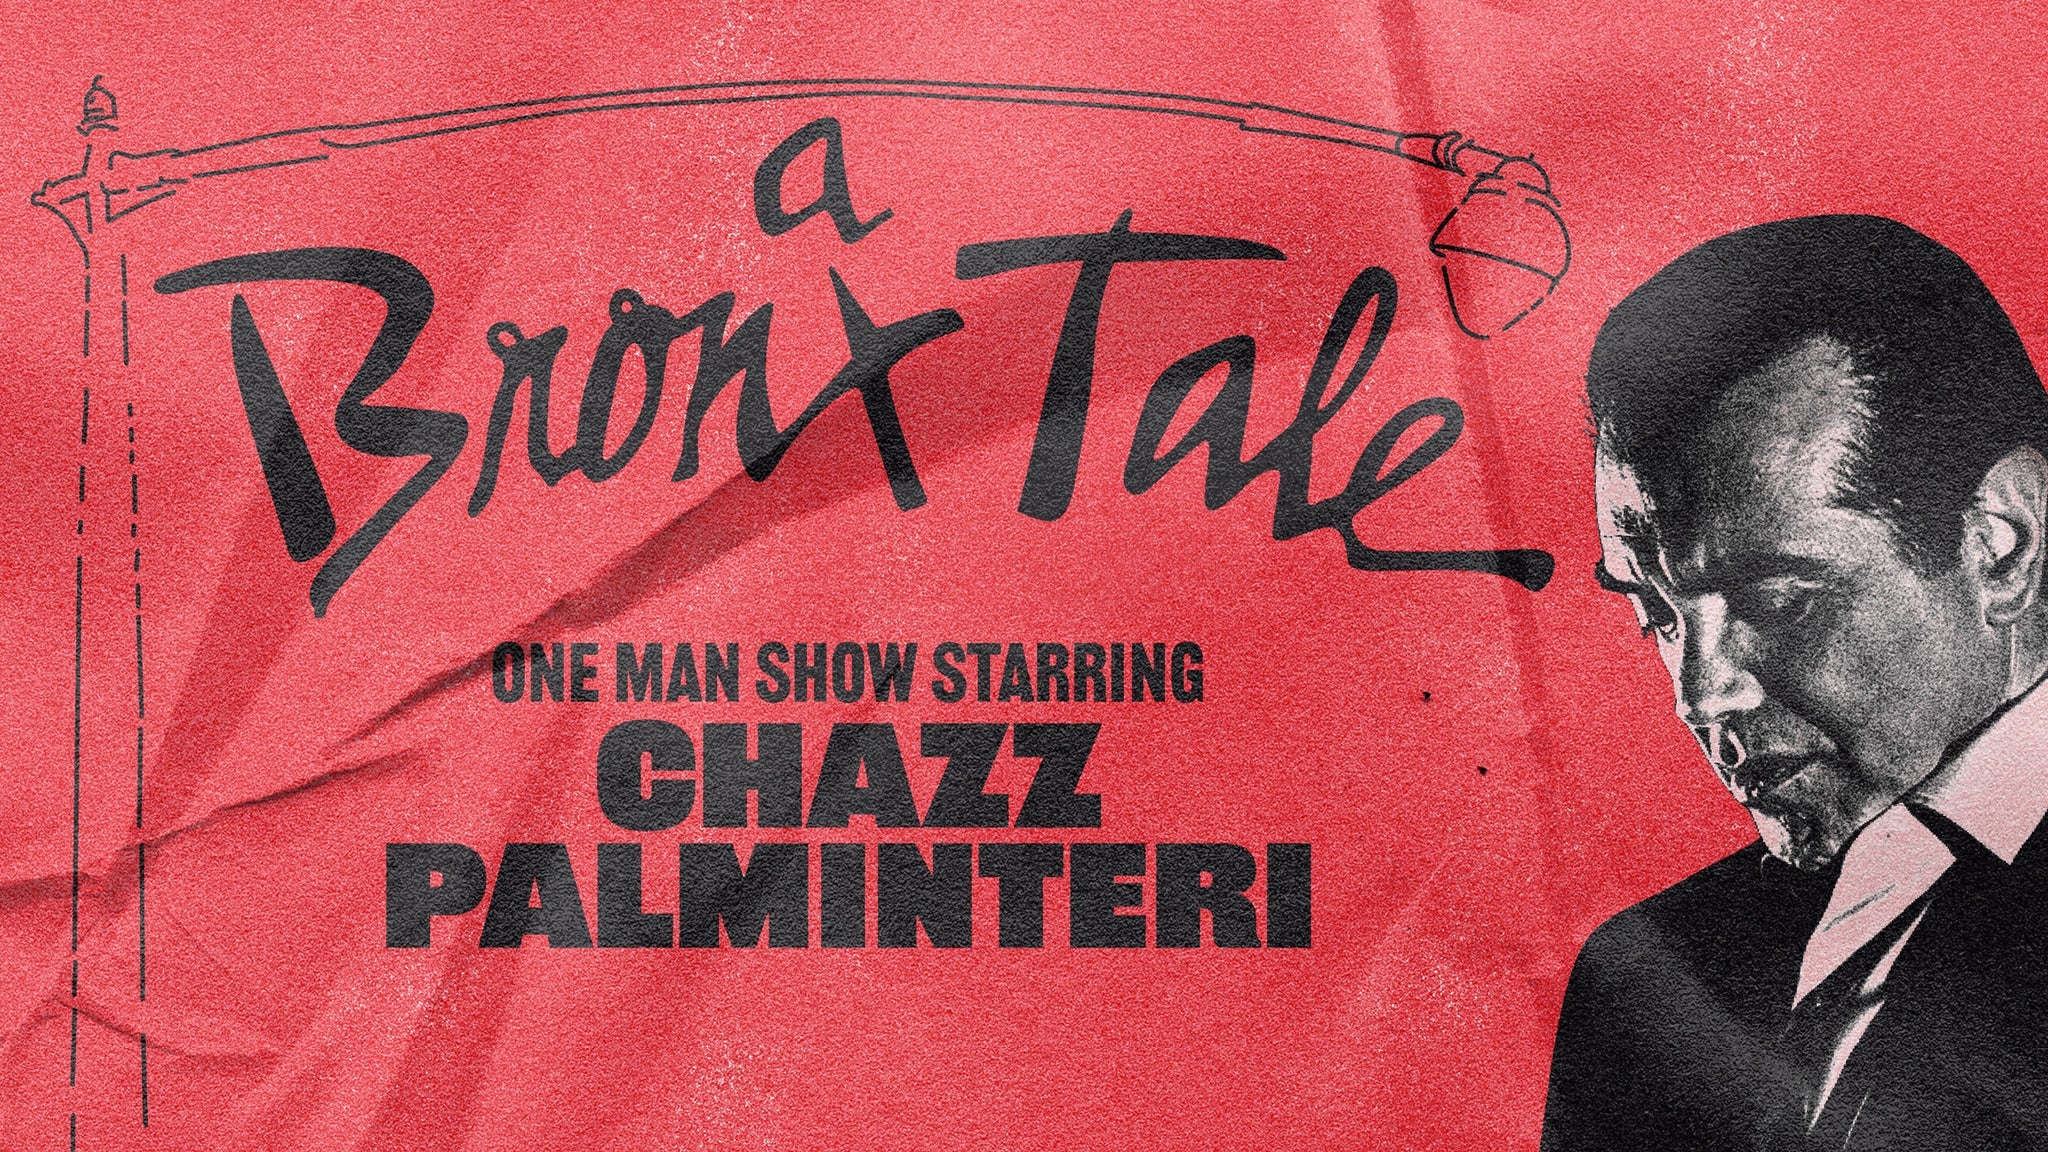 Chazz Palminteri- A Bronx Tale in Montclair promo photo for Official Platinum Onsale presale offer code